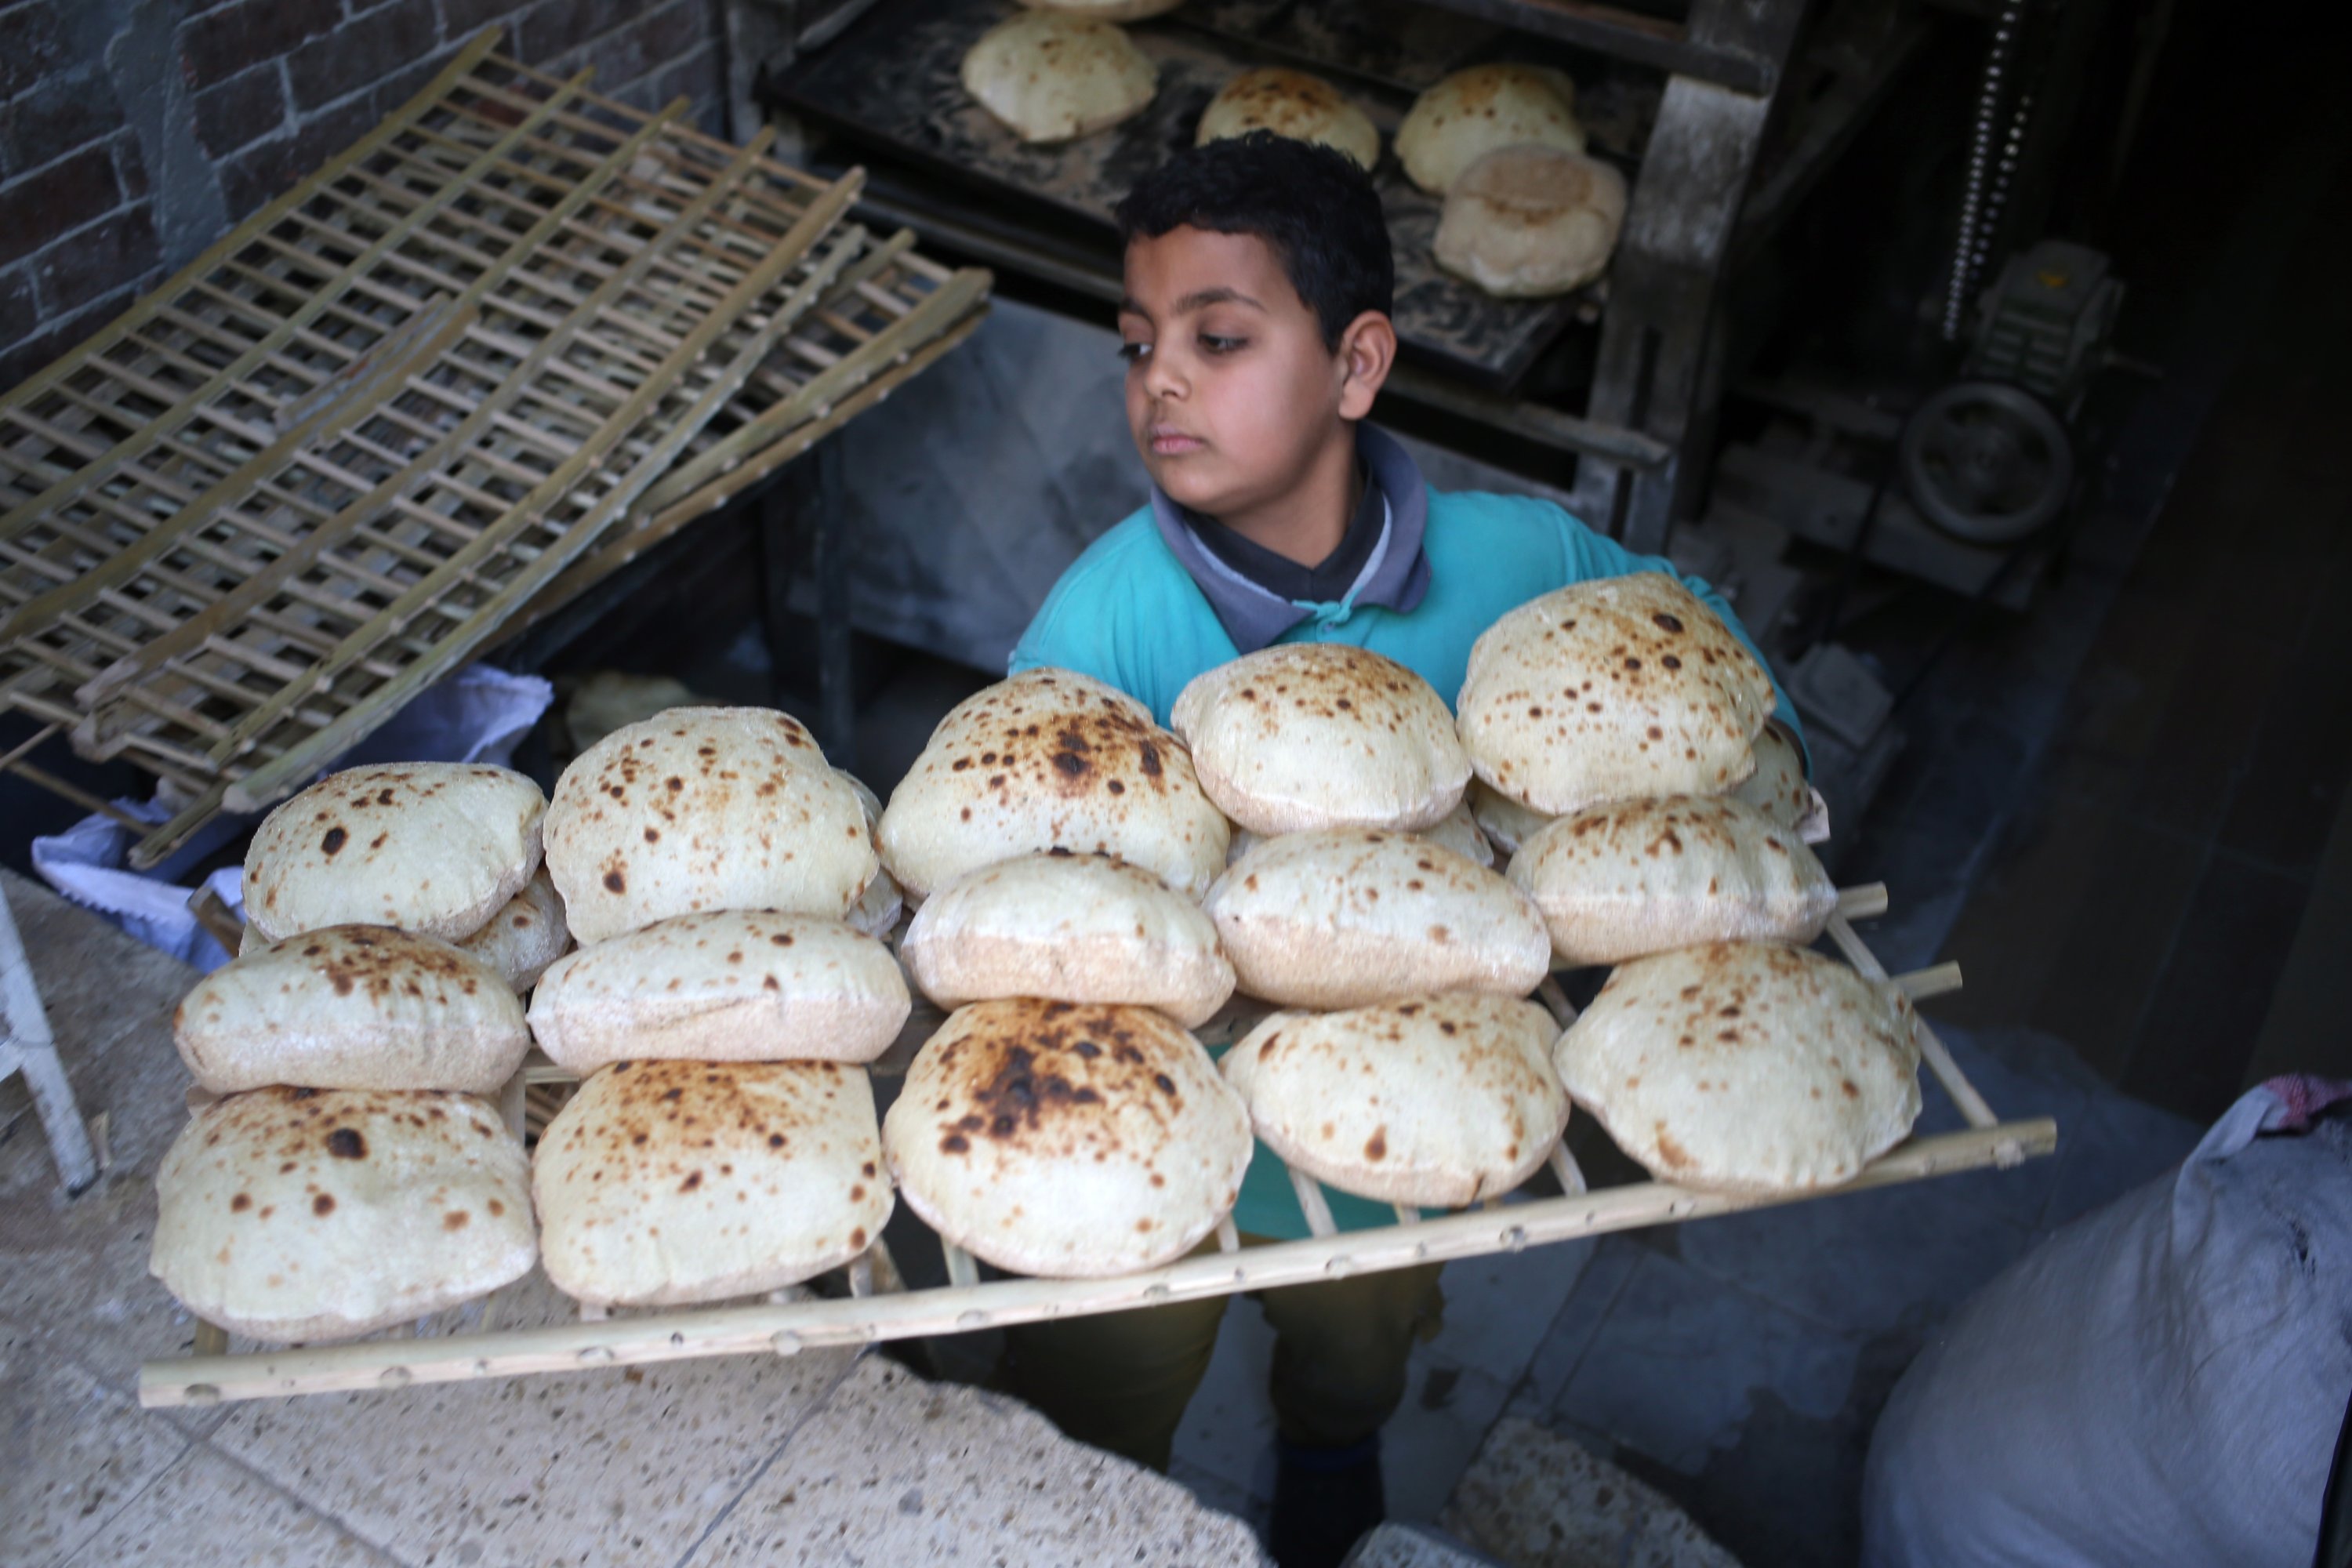 Egypt faces rising bread costs as Ukraine war halts wheat exports | Daily Sabah